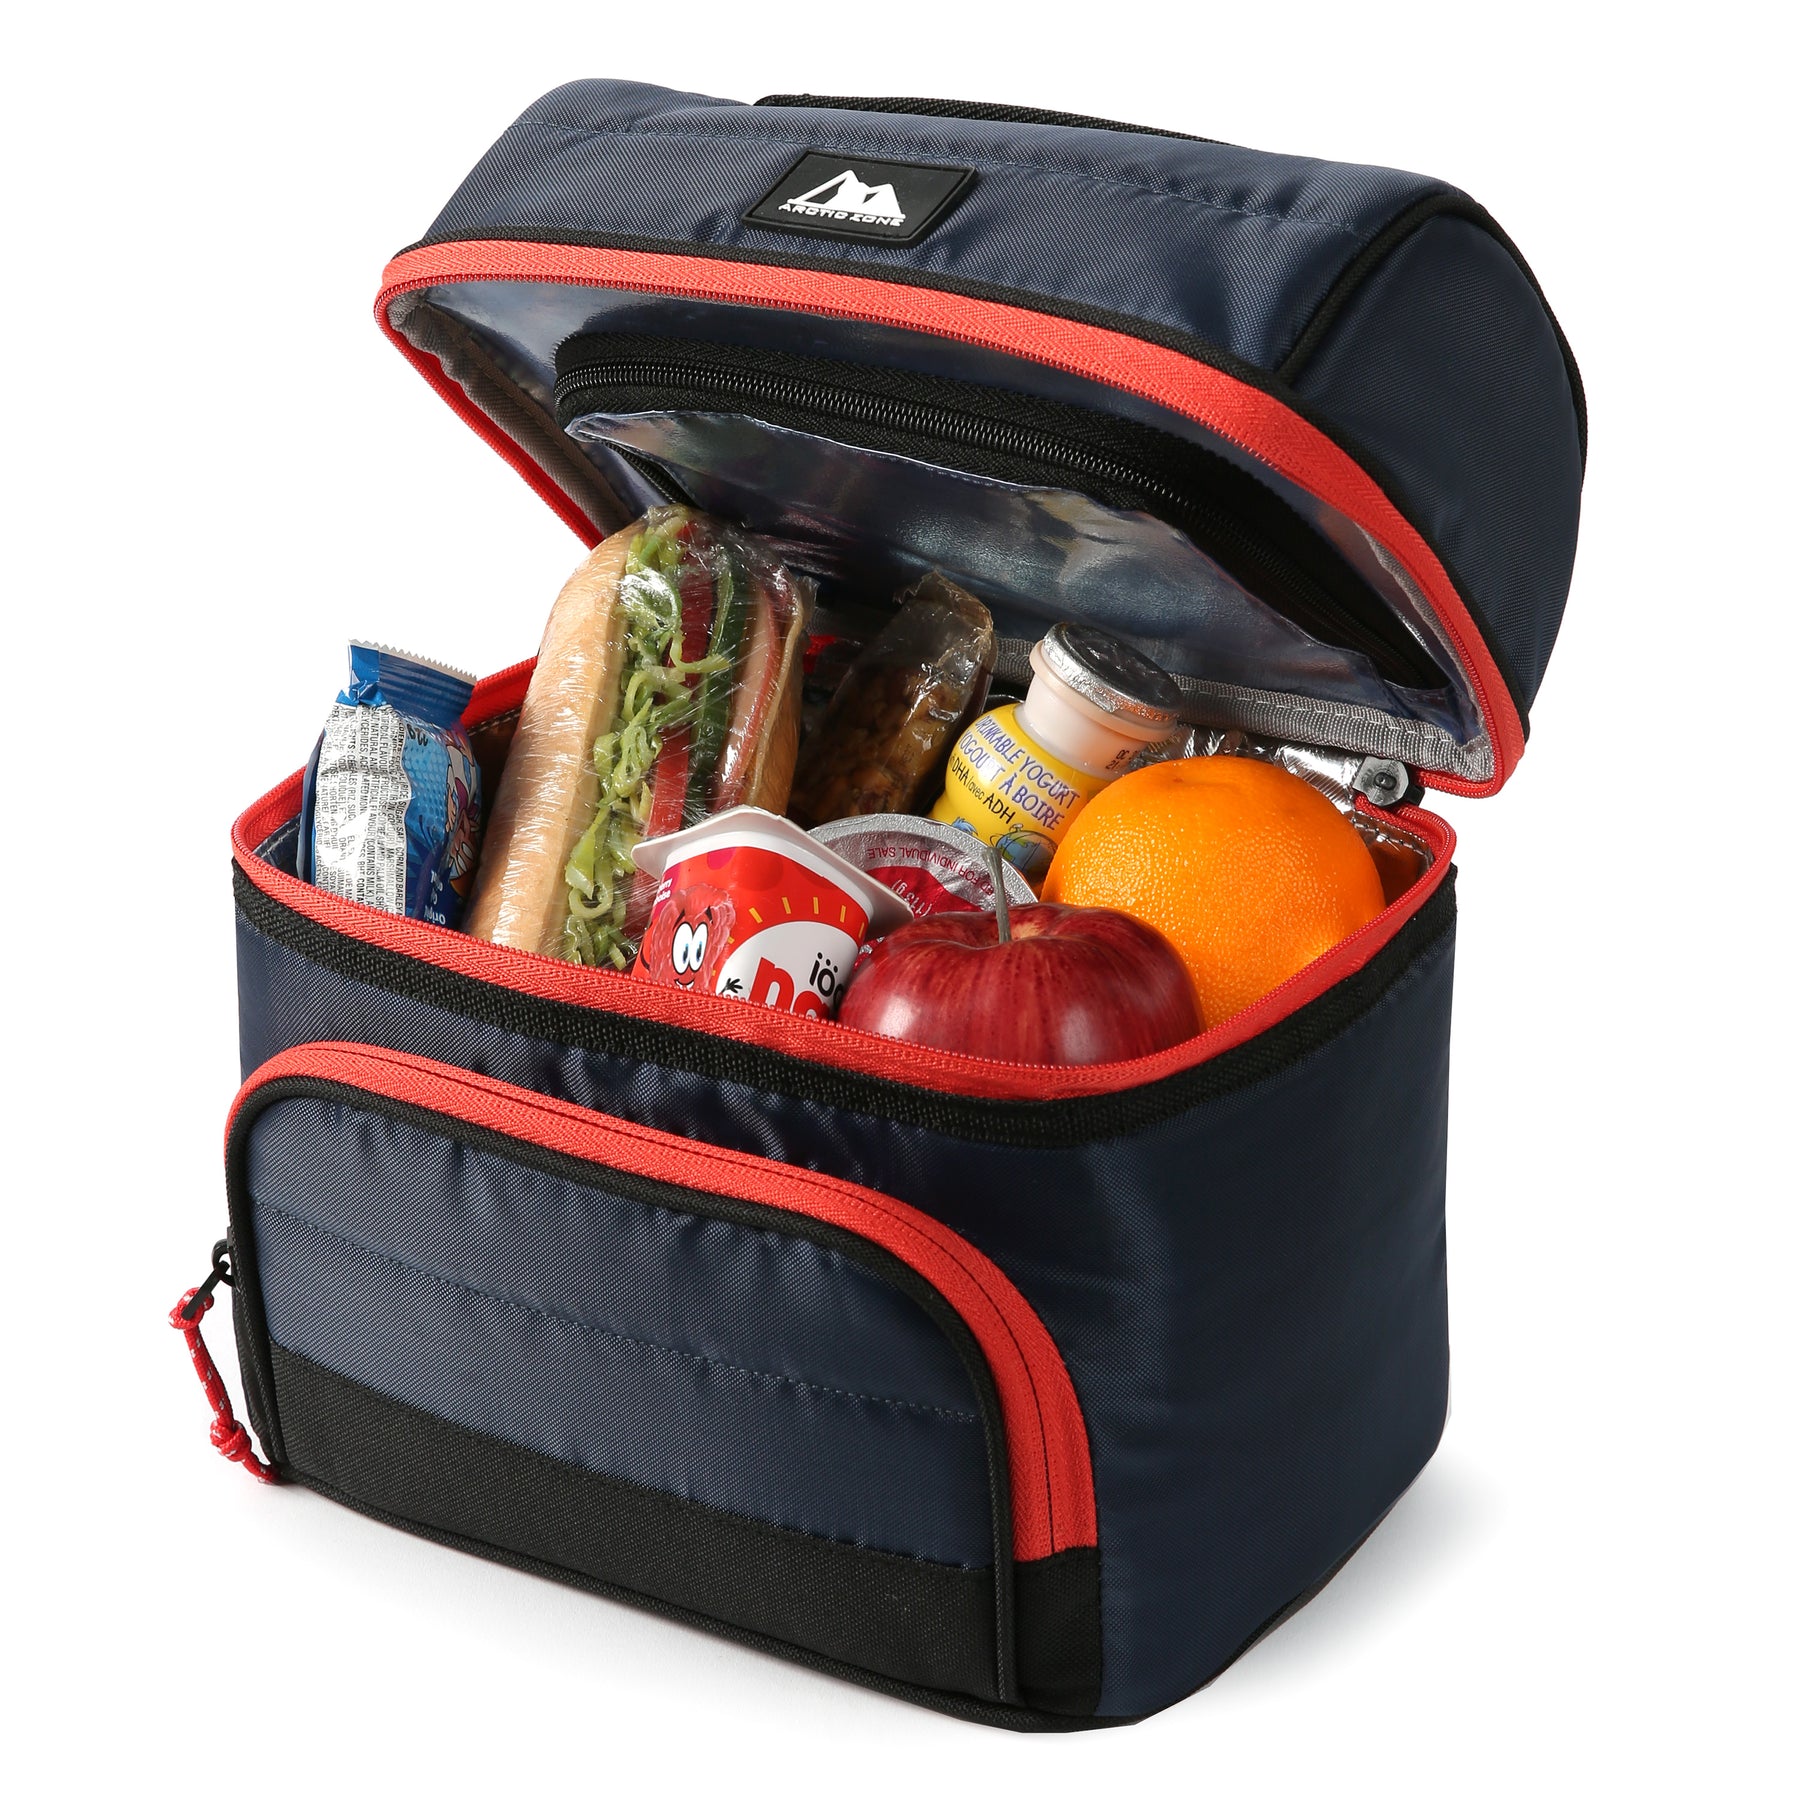 ARTIC ZONE ZIPPERED INSULATED LUNCH BOX WITH SANDWICH CONTAINER BLACK RED  BOYS